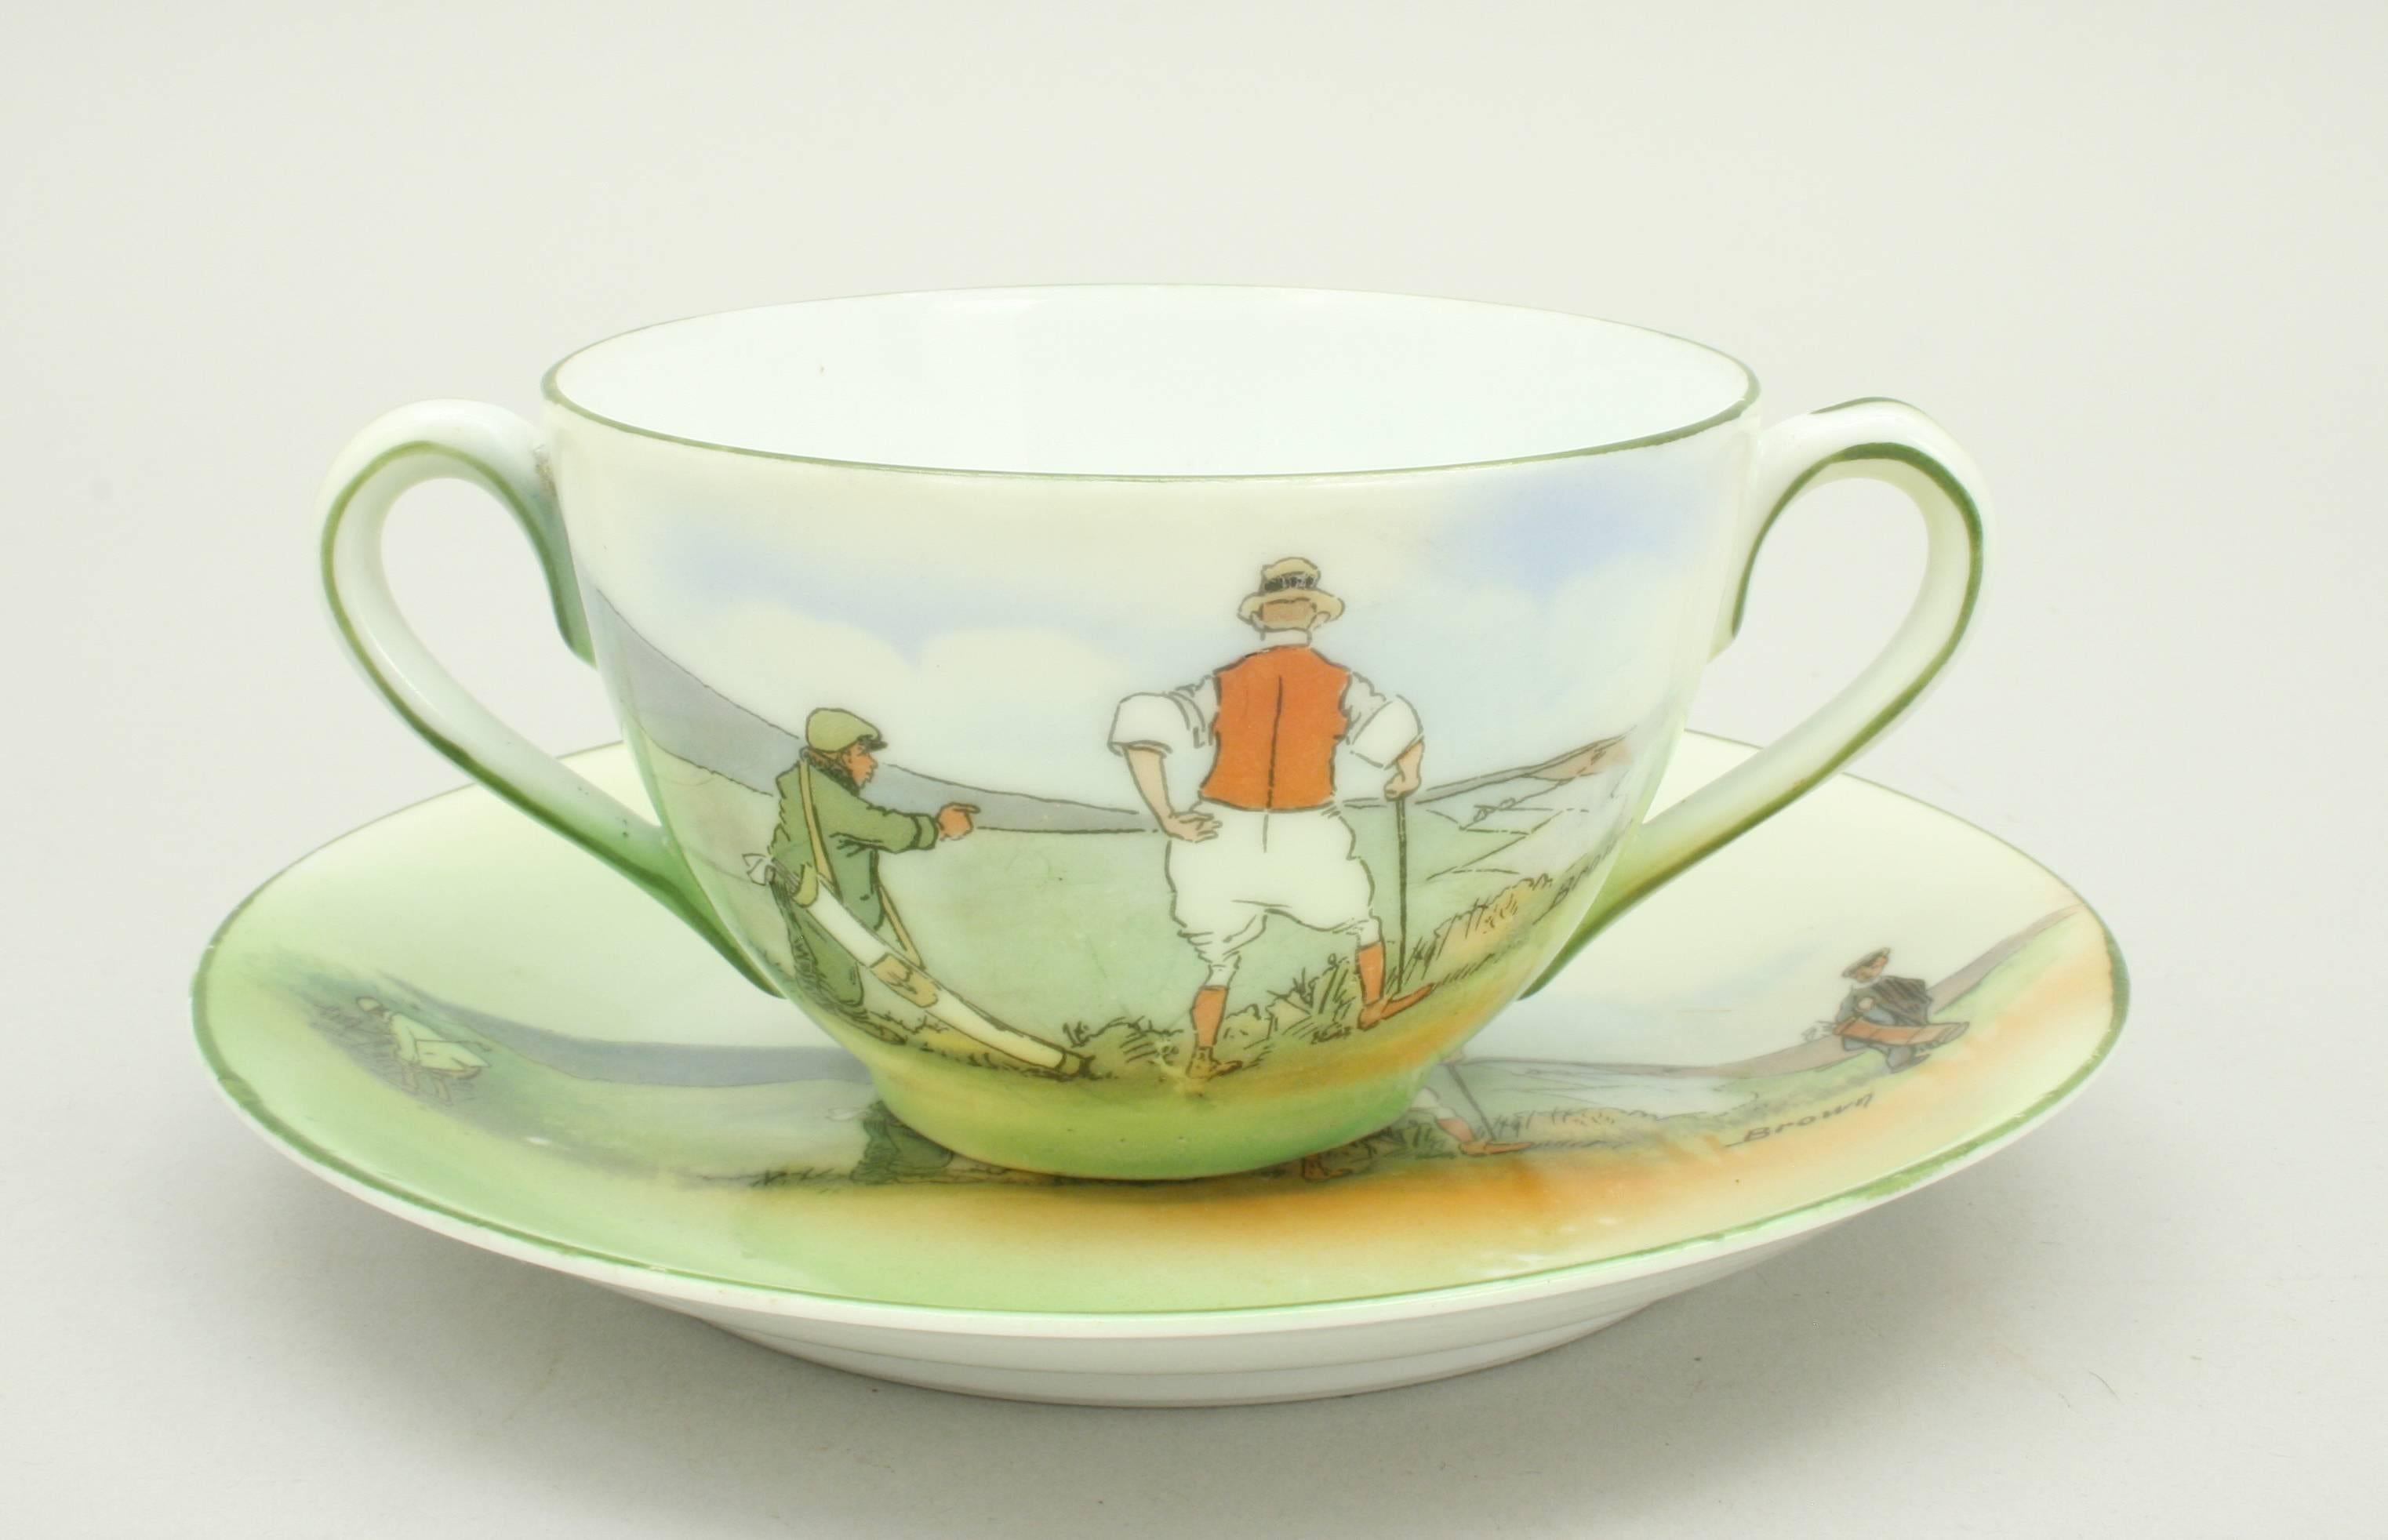 Schwarzburg golf porcelain tea set.
A group of four Schwarzburg porcelain pieces with golf scenes after Michael Brown. The set comprising of a bouillon cup with saucer, side plate and a dinner plate. The golf scenes are applied transfers with very